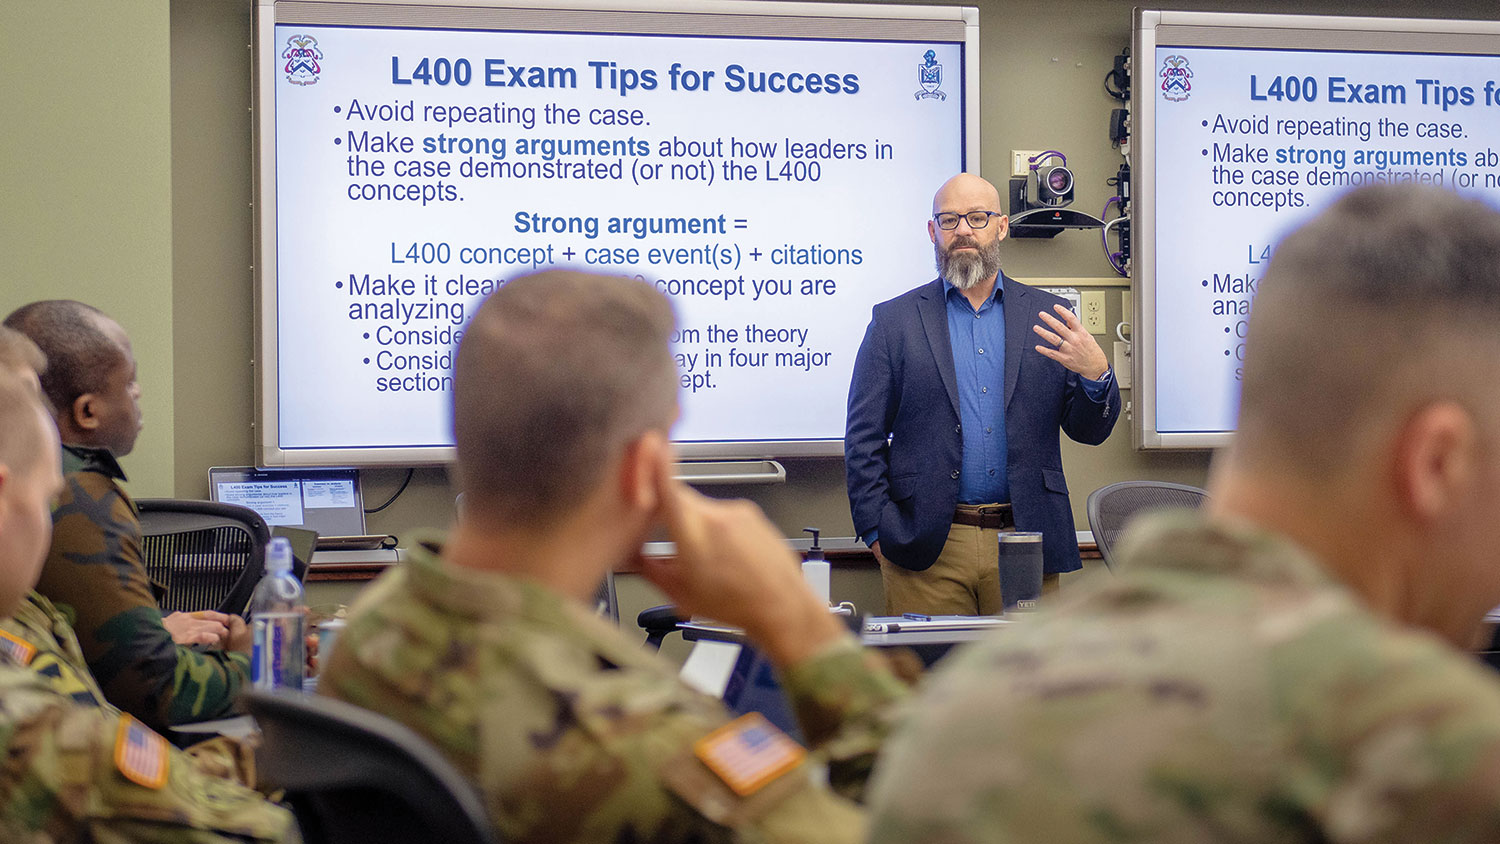 Dr. Trent Lythgoe, Command and General Staff College Educator of the Year, prepares Command and general Staff College students for an upcoming exam, Jan. 20, at Fort Leavenworth’s Lewis and Clark Center.